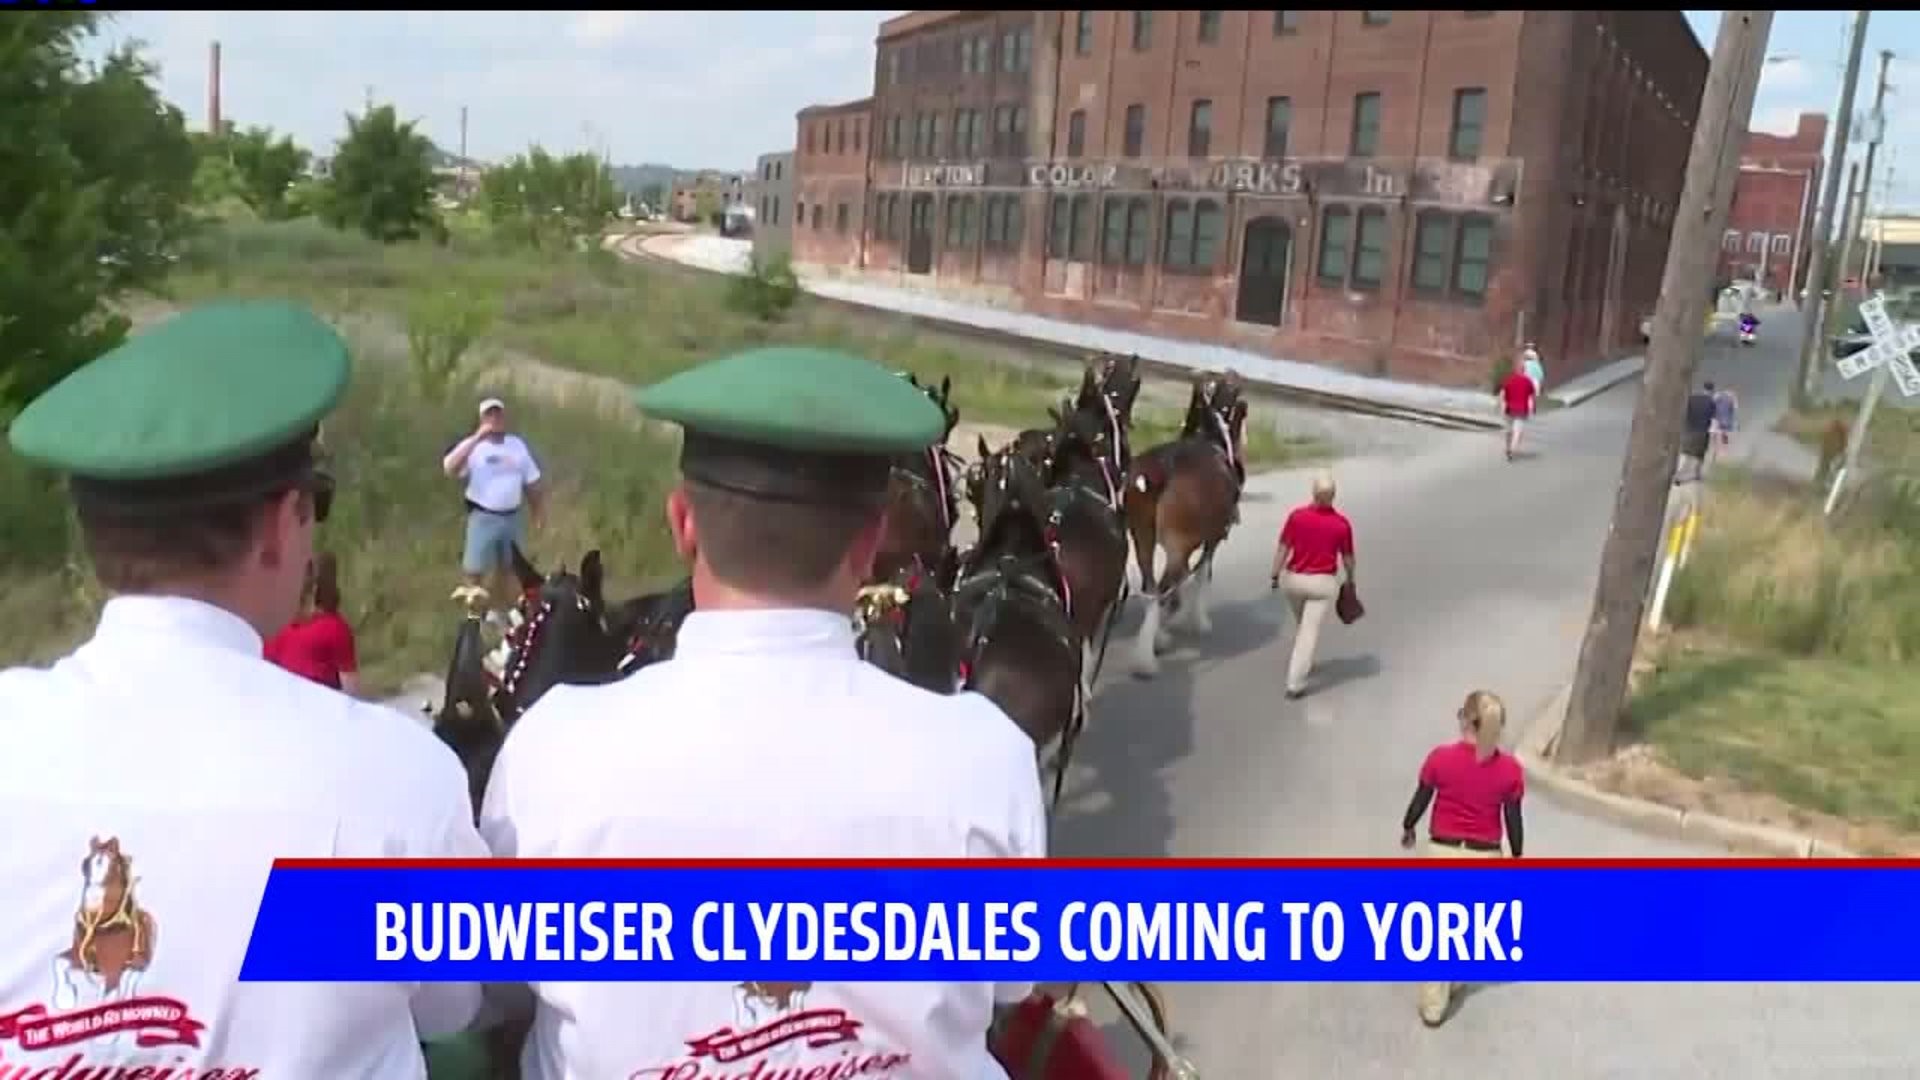 Budweiser Clysedales are Coming to York County!